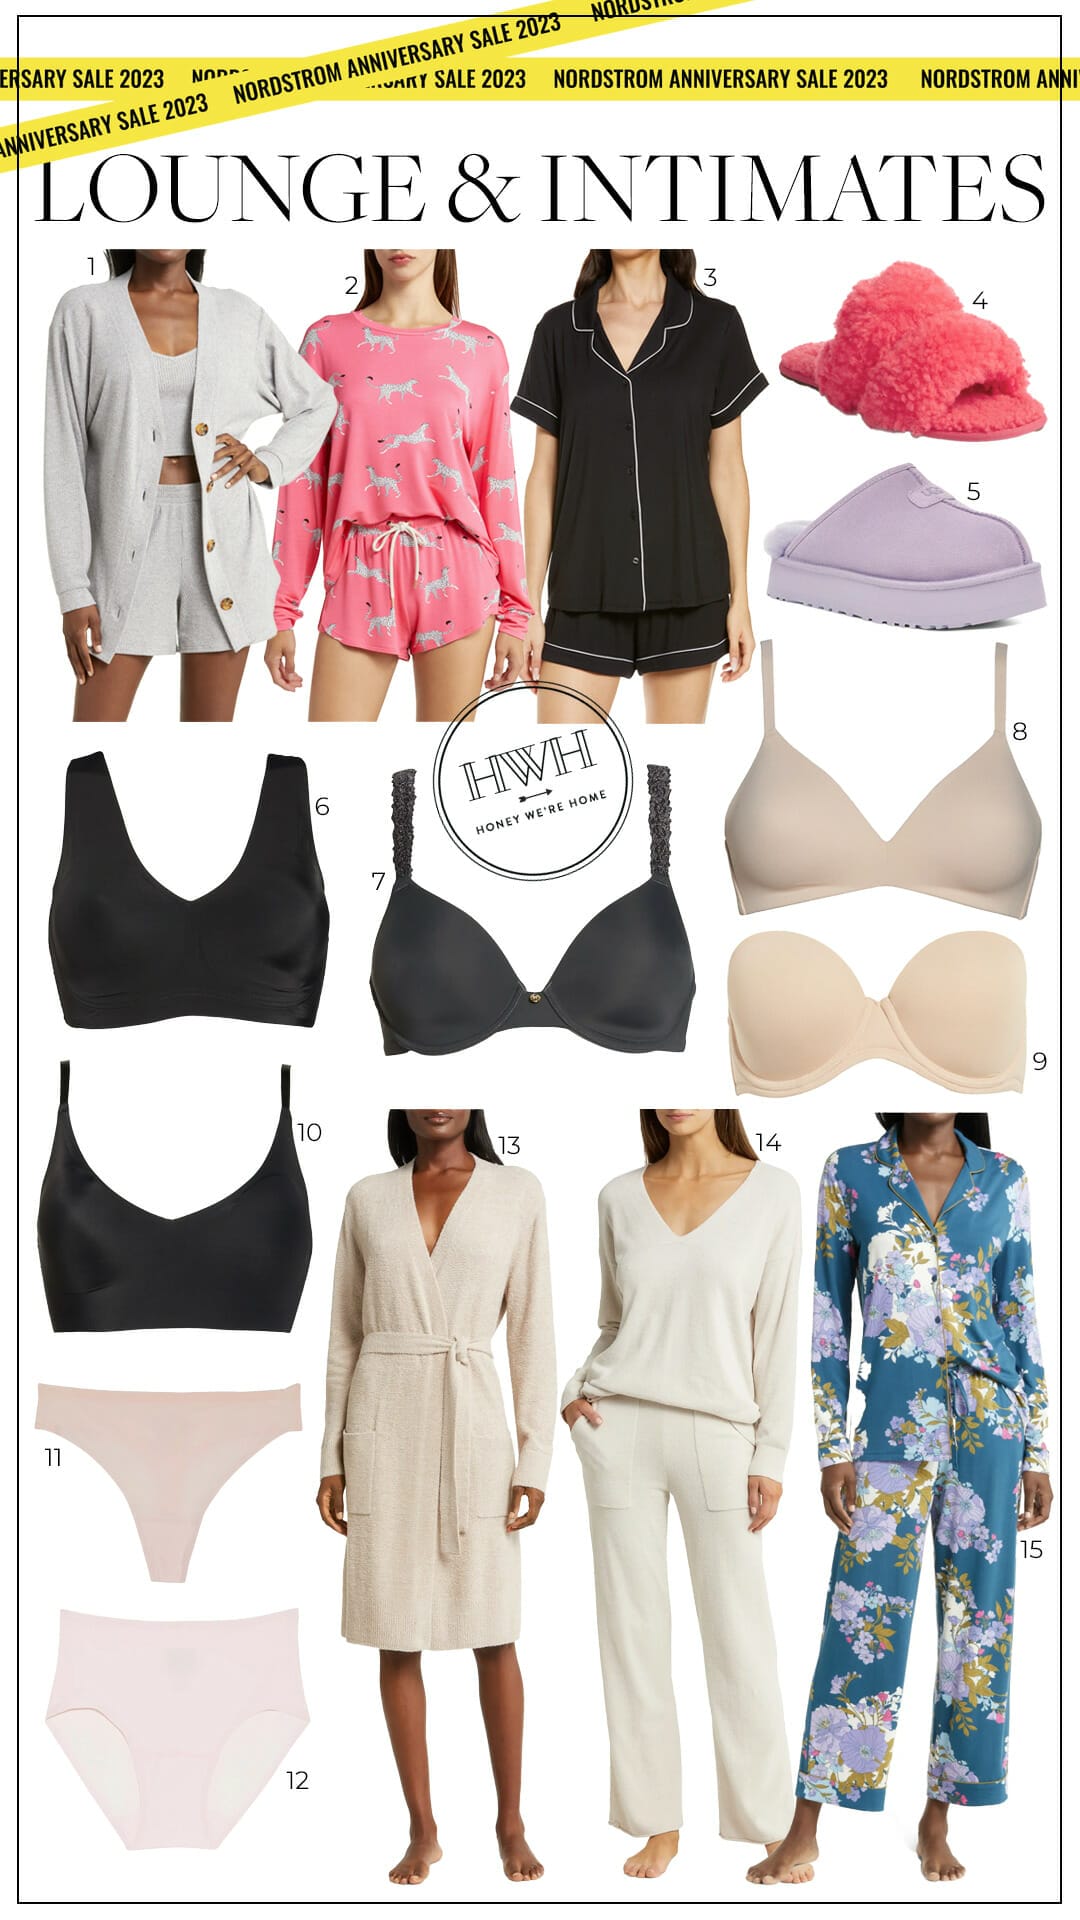 NSALE Loung and Intimates